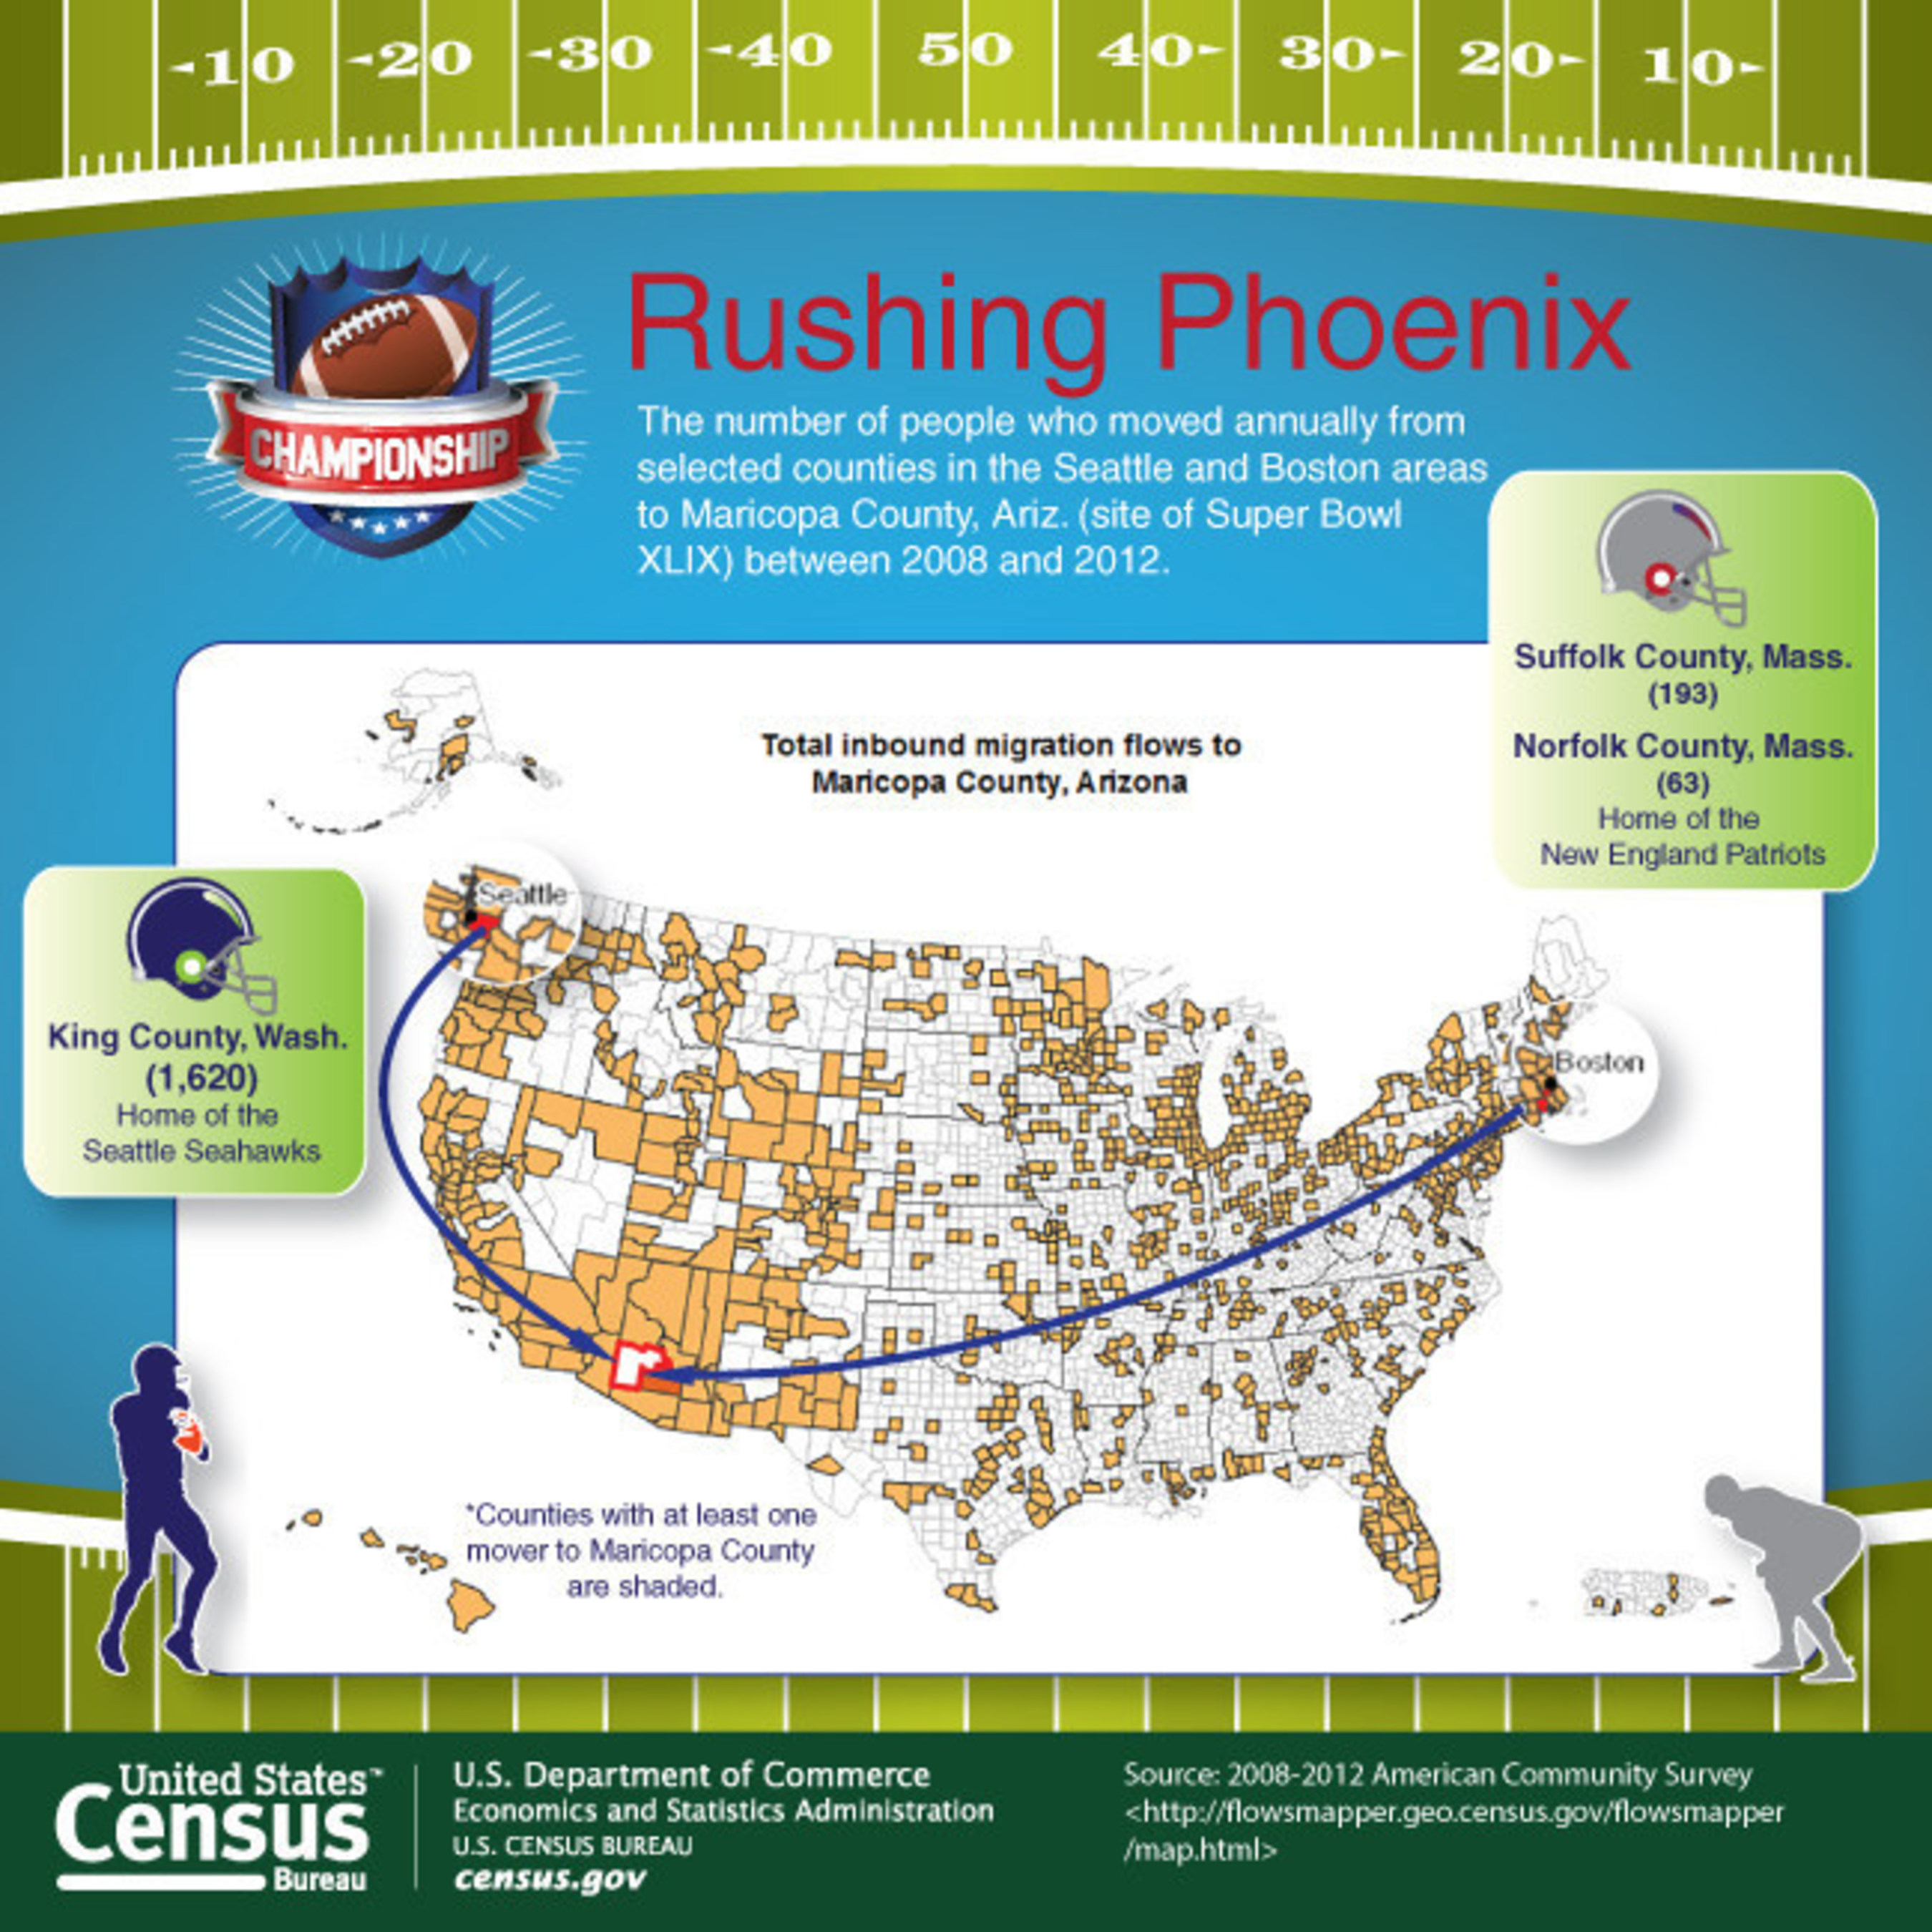 To commemorate Super Bowl XLIX, the Census Bureau has created a graphic examining the migration from the Seattle and Boston areas to Maricopa county (Phoenix)